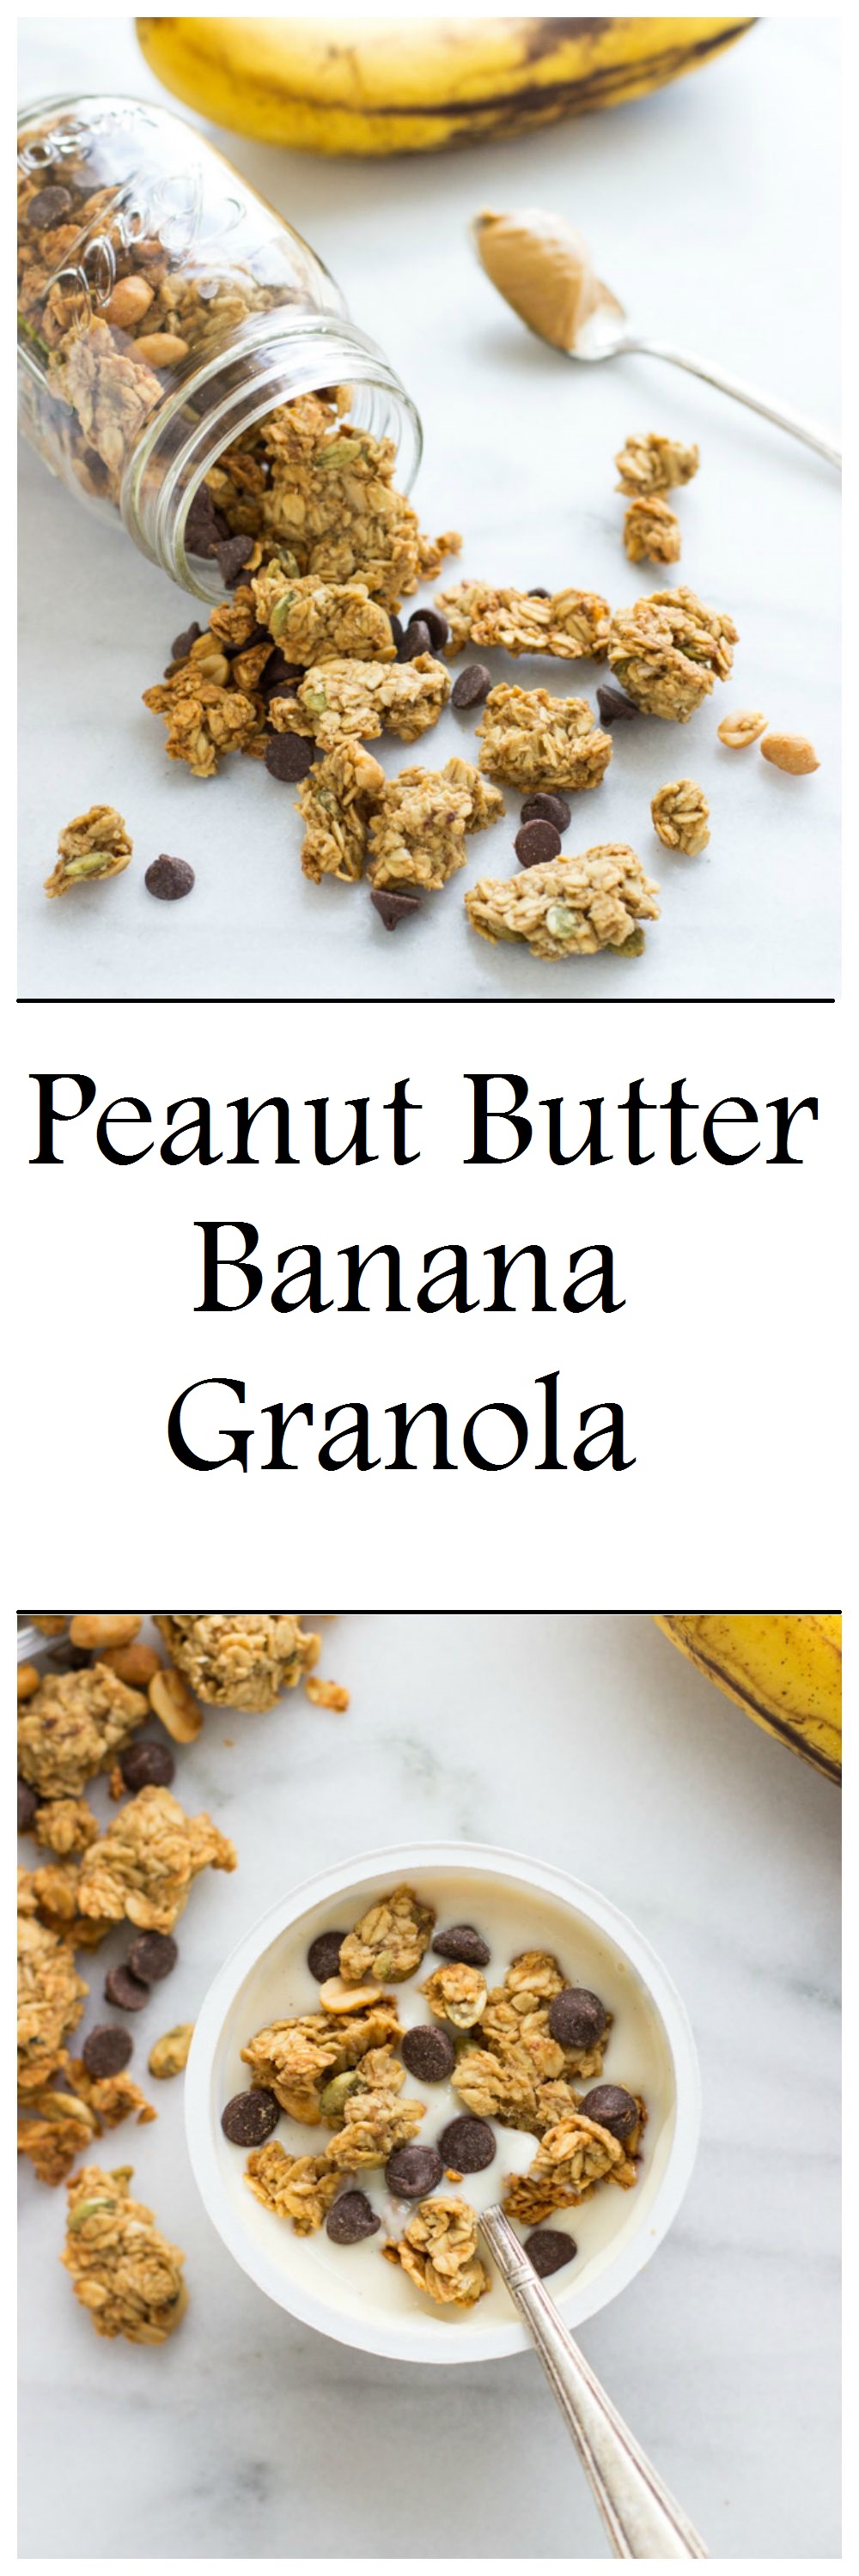 Peanut Butter, Banana & Chocolate Chip Granola- made in one bowl and it’s vegan, gluten-free, oil-free and refined sugar-free!